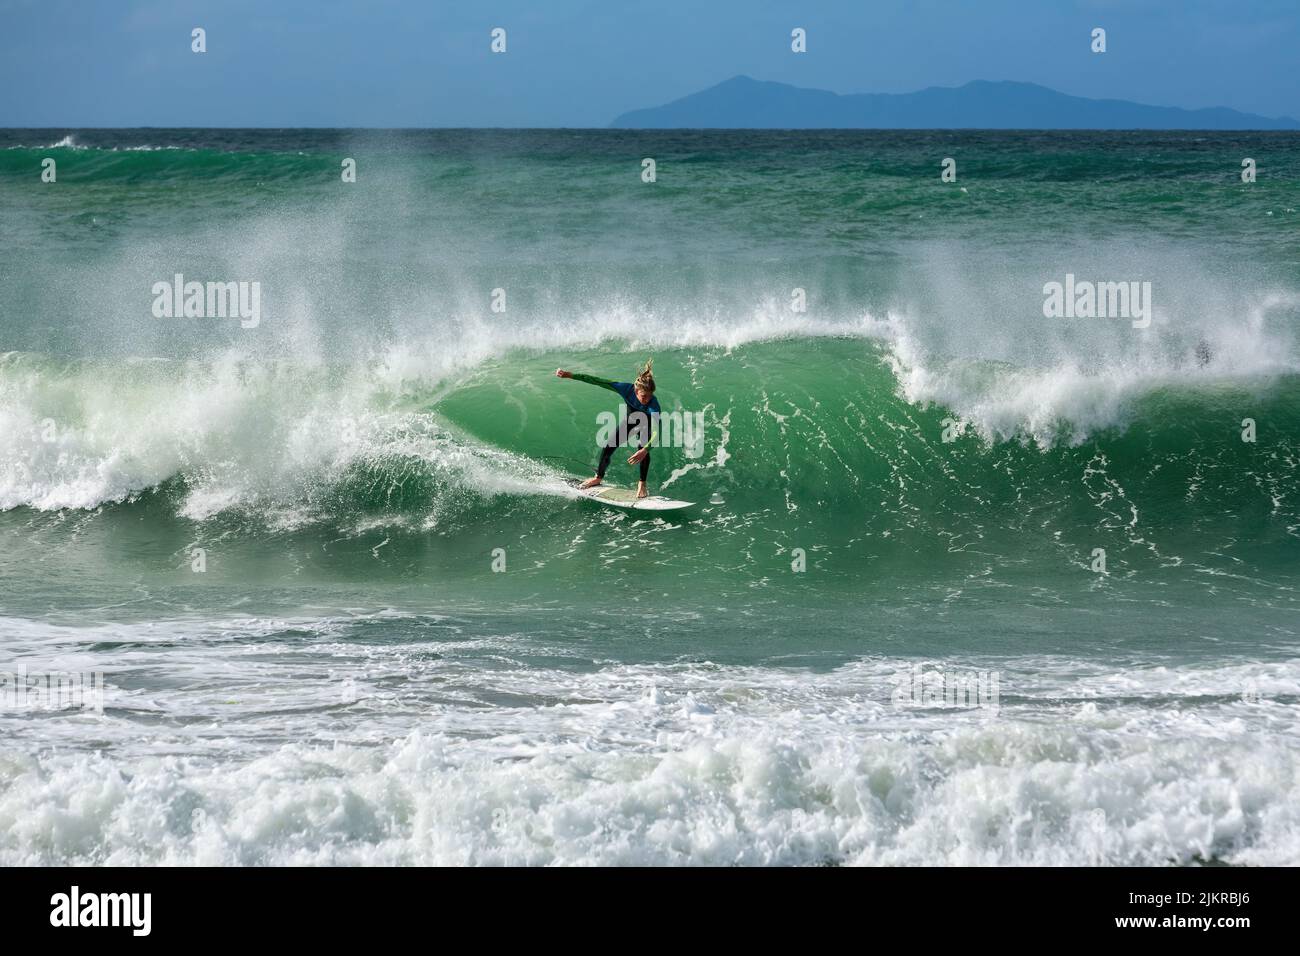 A surfer rides a wave at Mount Maunganui, New Zealand, one of the country's most popular surfing beaches. In the background is Mayor Island Stock Photo